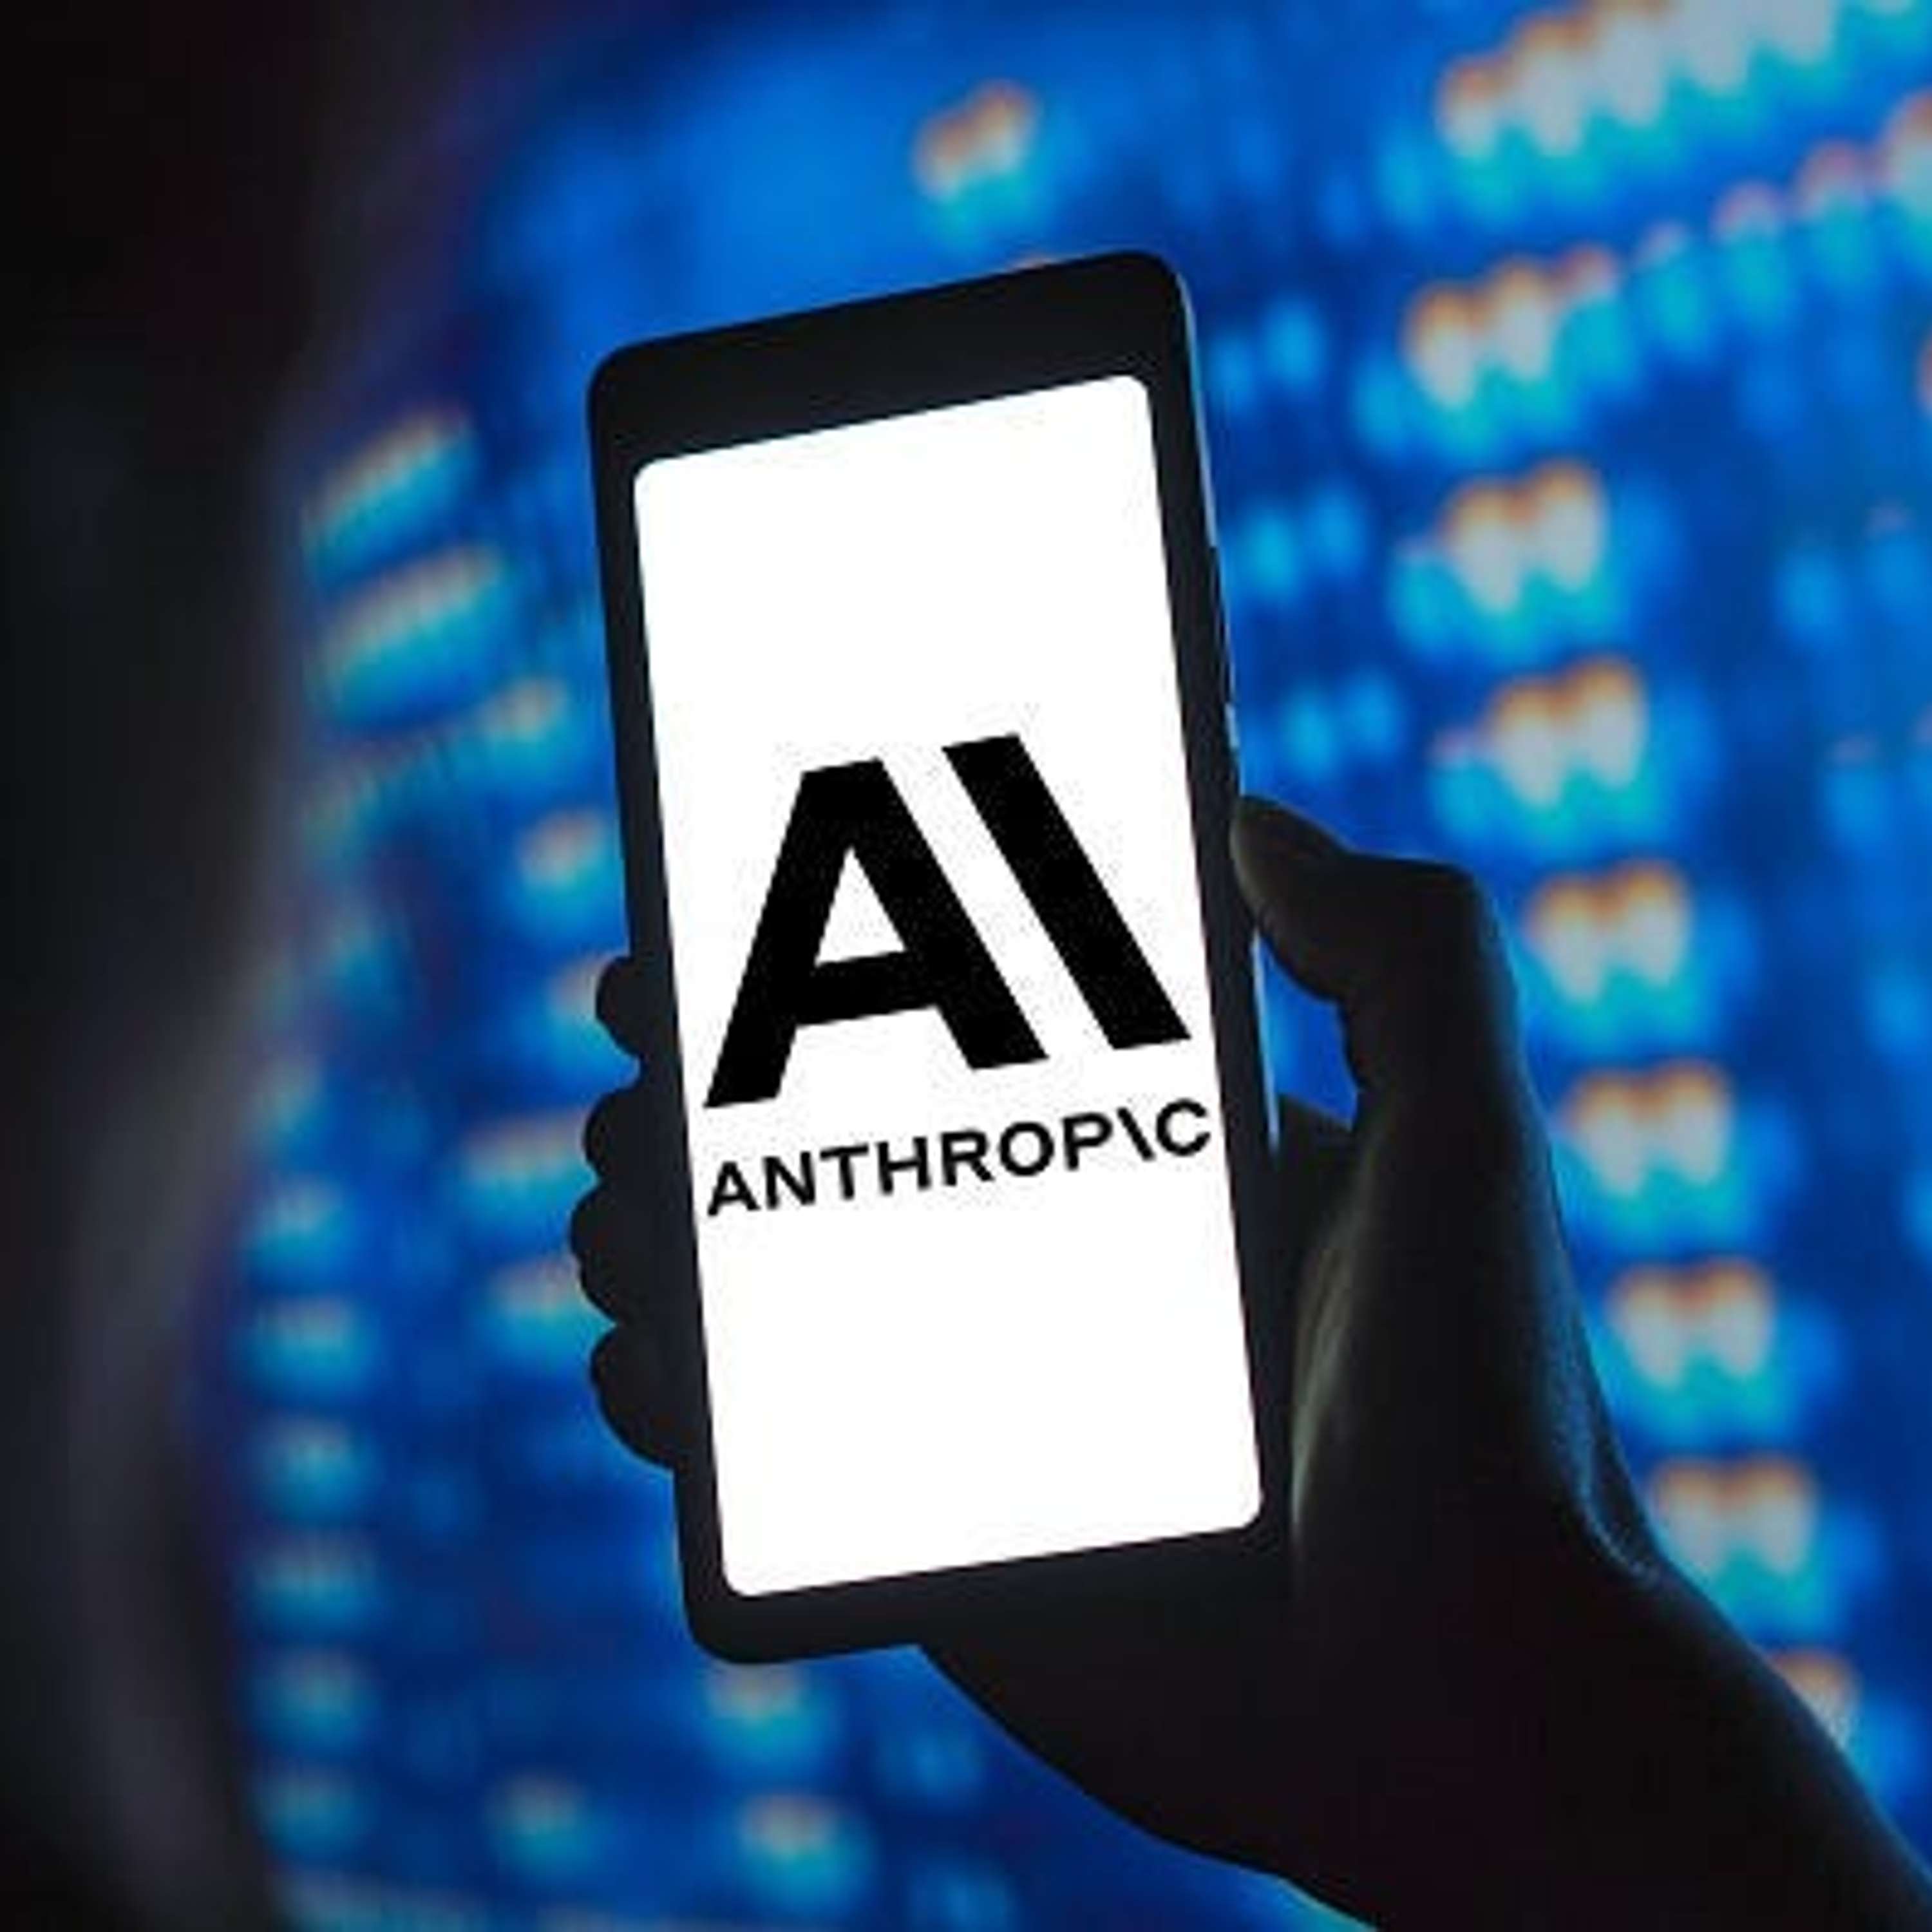 Anthropic Launches Claude App, Microsoft's $2.2B Expansion Pledge, Musk Axes Supercharger Team, Apple's iPhone Clock Glitch, and more...